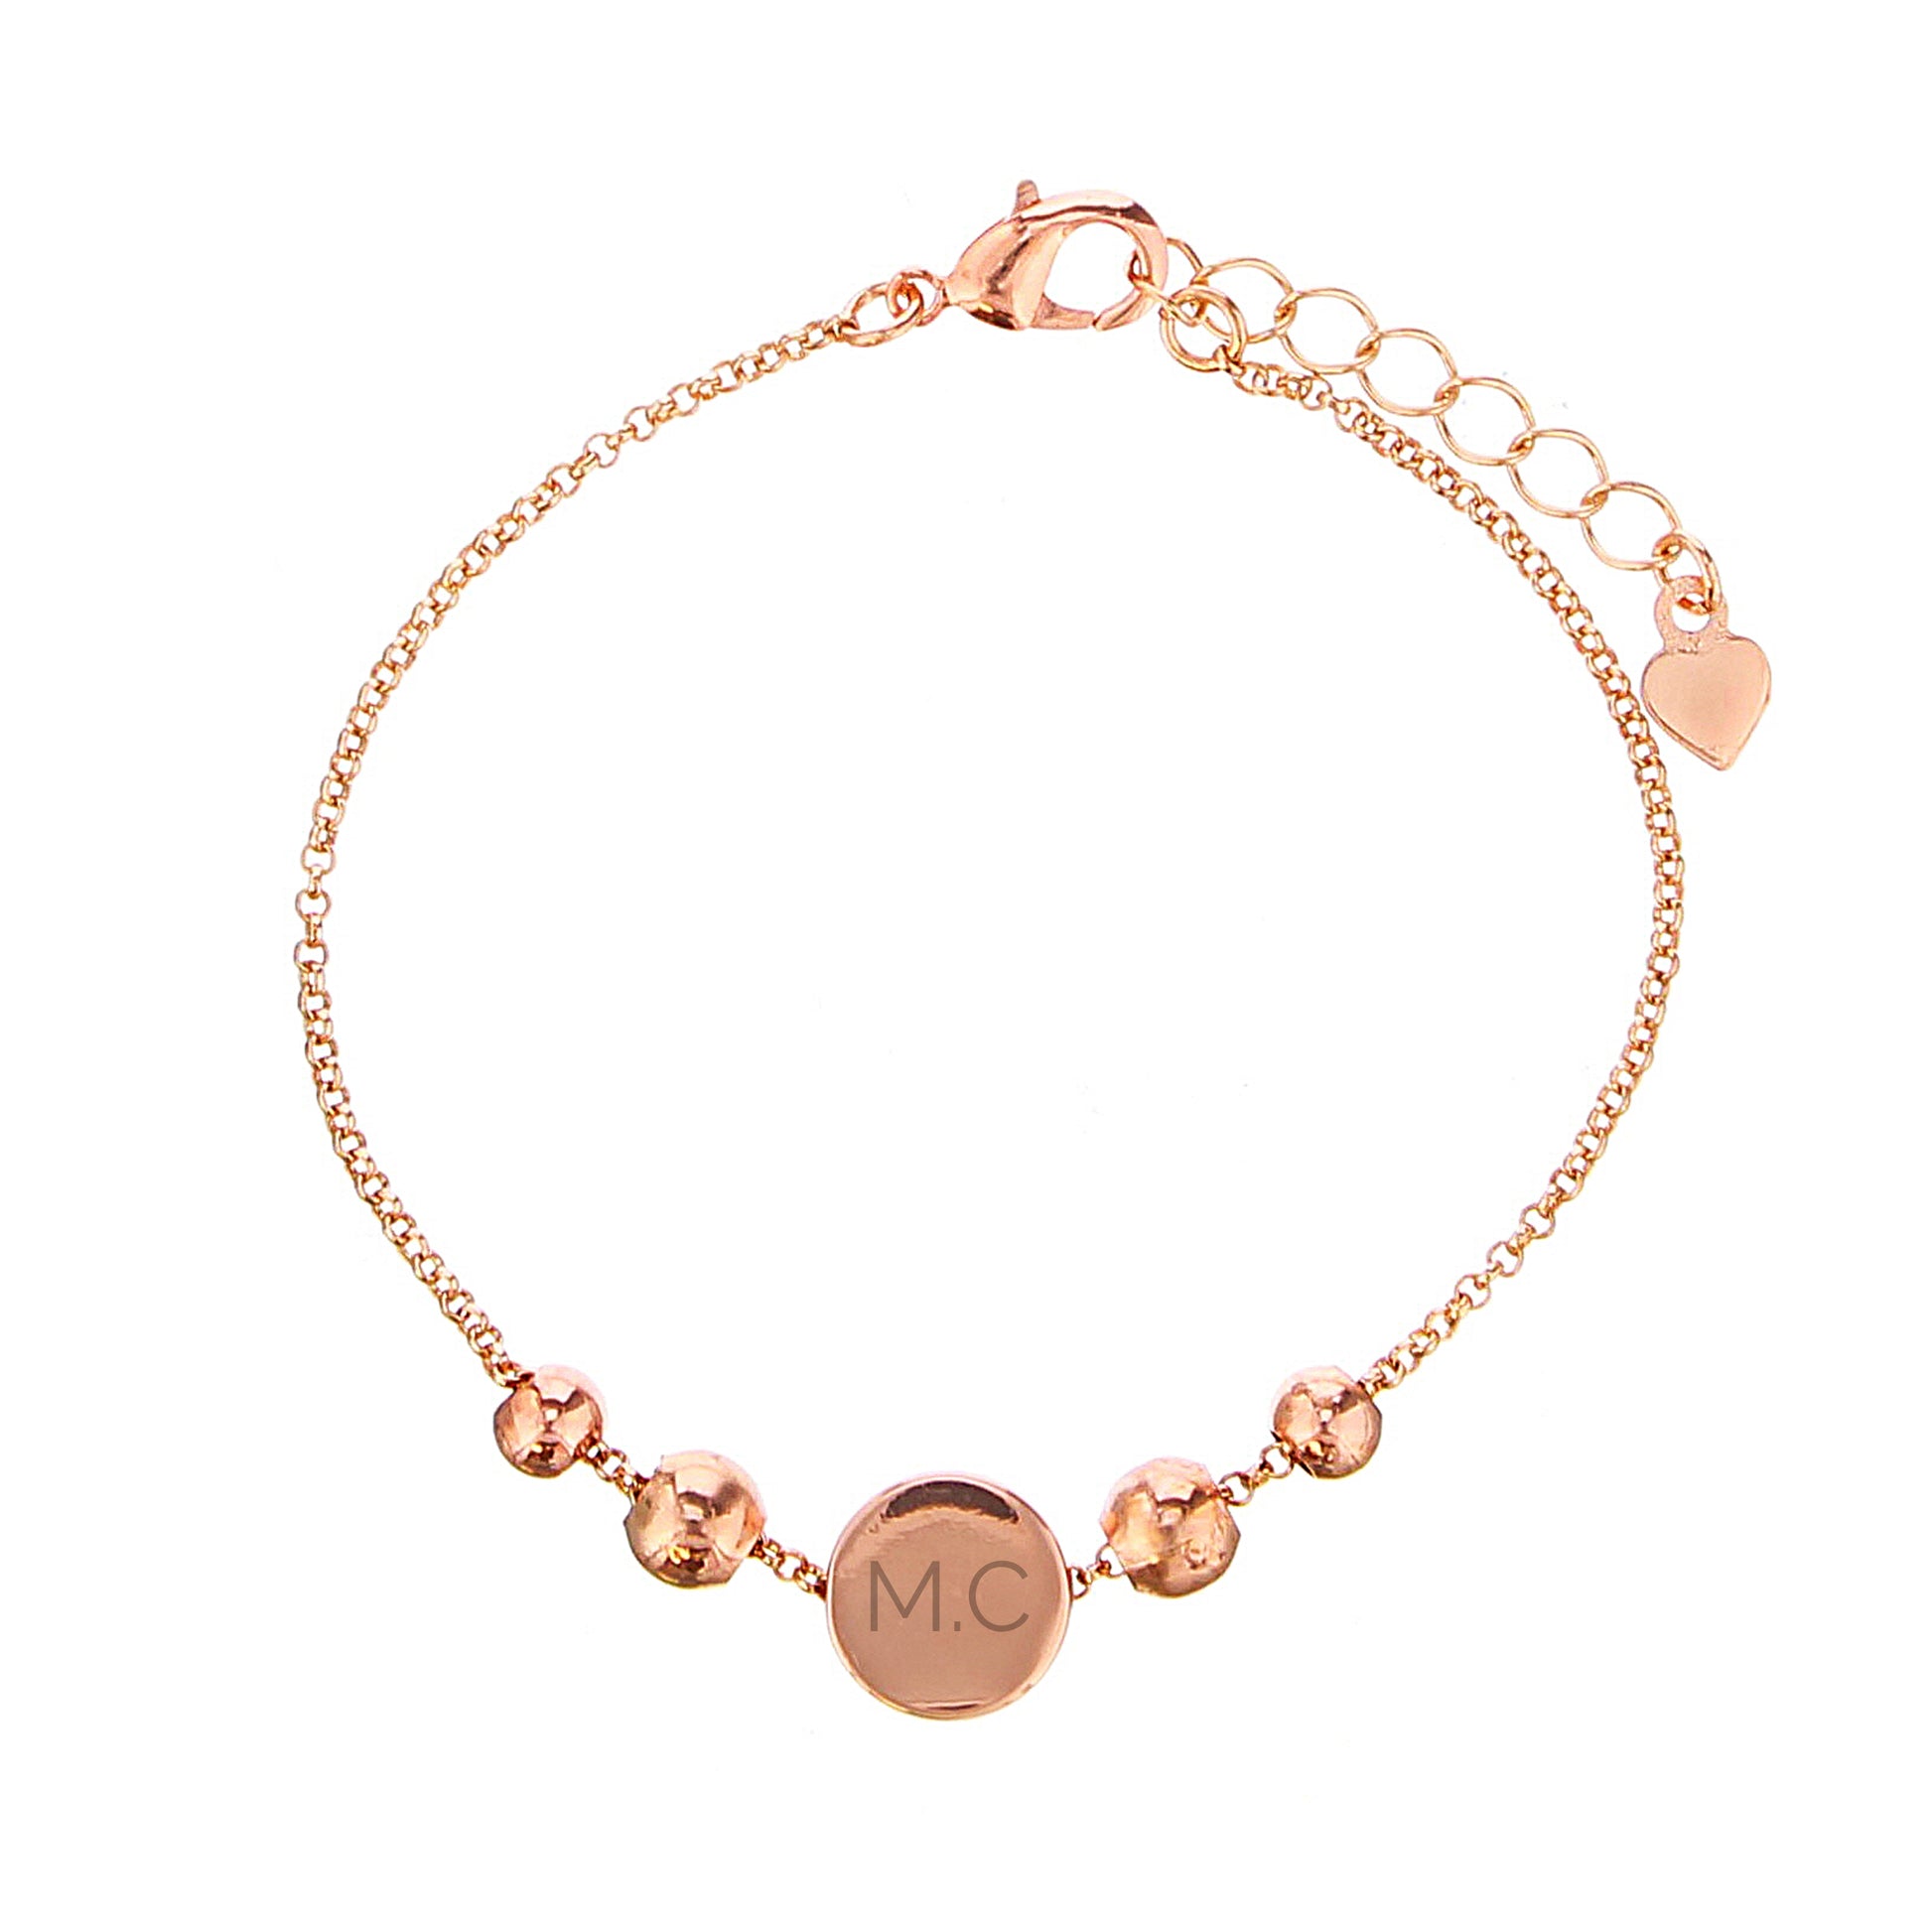 Rose gold tone initials disc bracelet, personalised - Lilybet loves